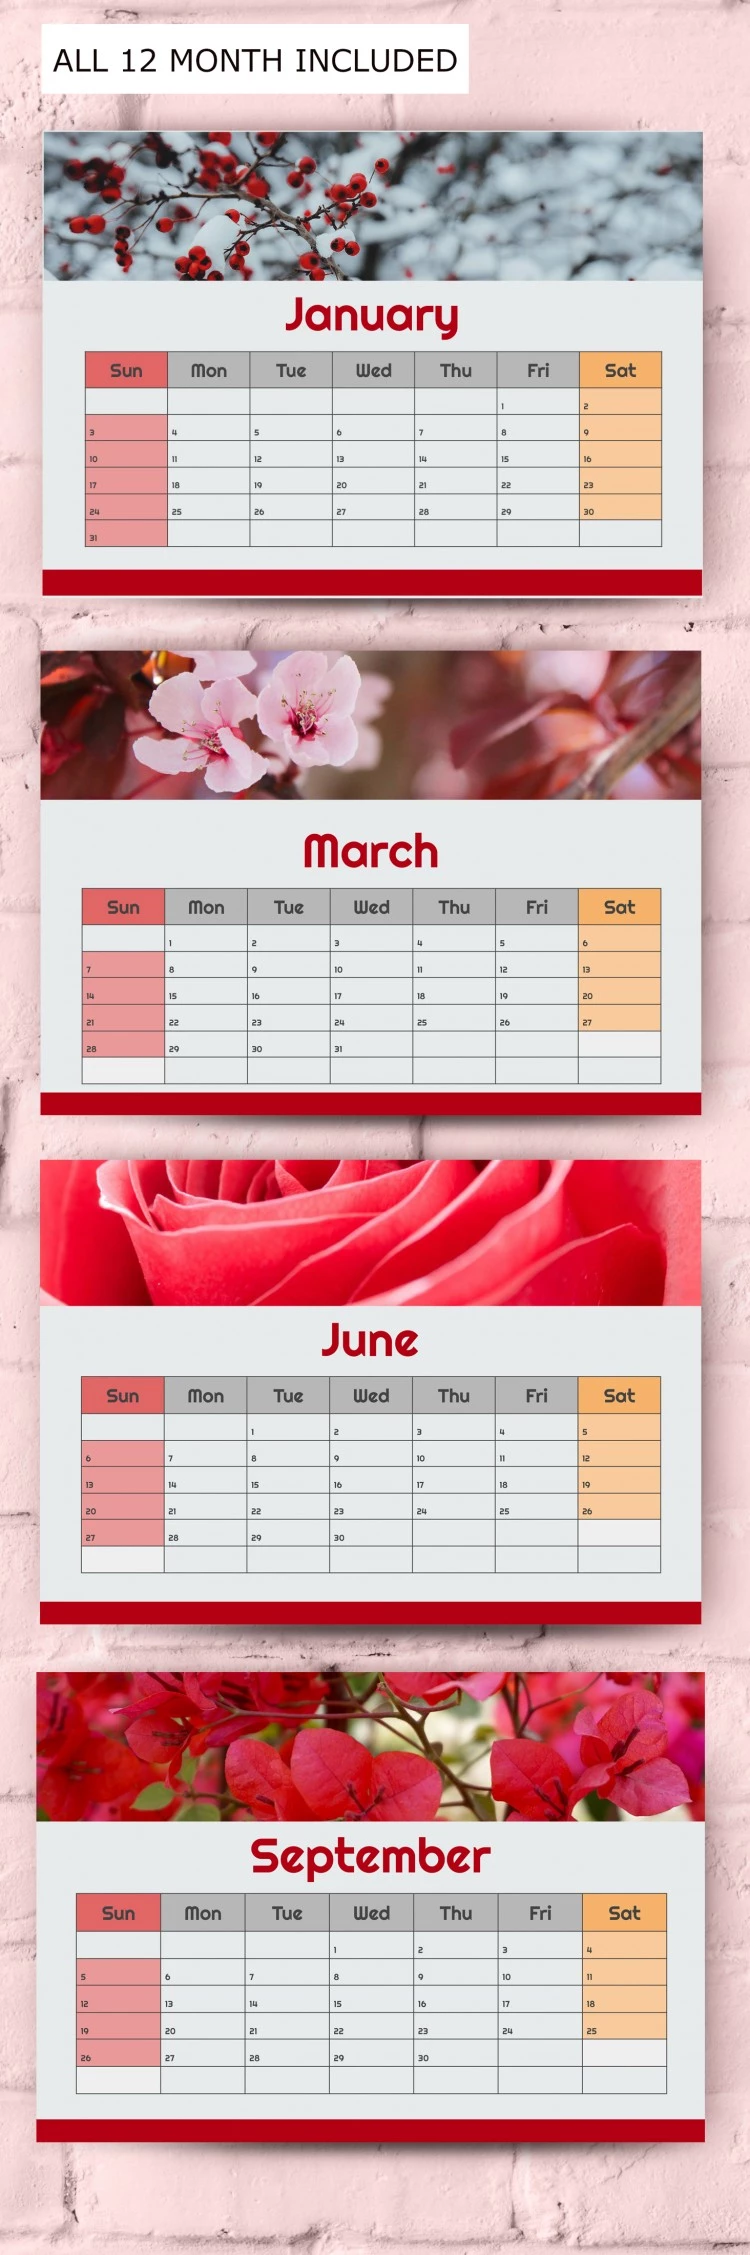 Calendrier imprimable 2021 - free Google Docs Template - 10061669